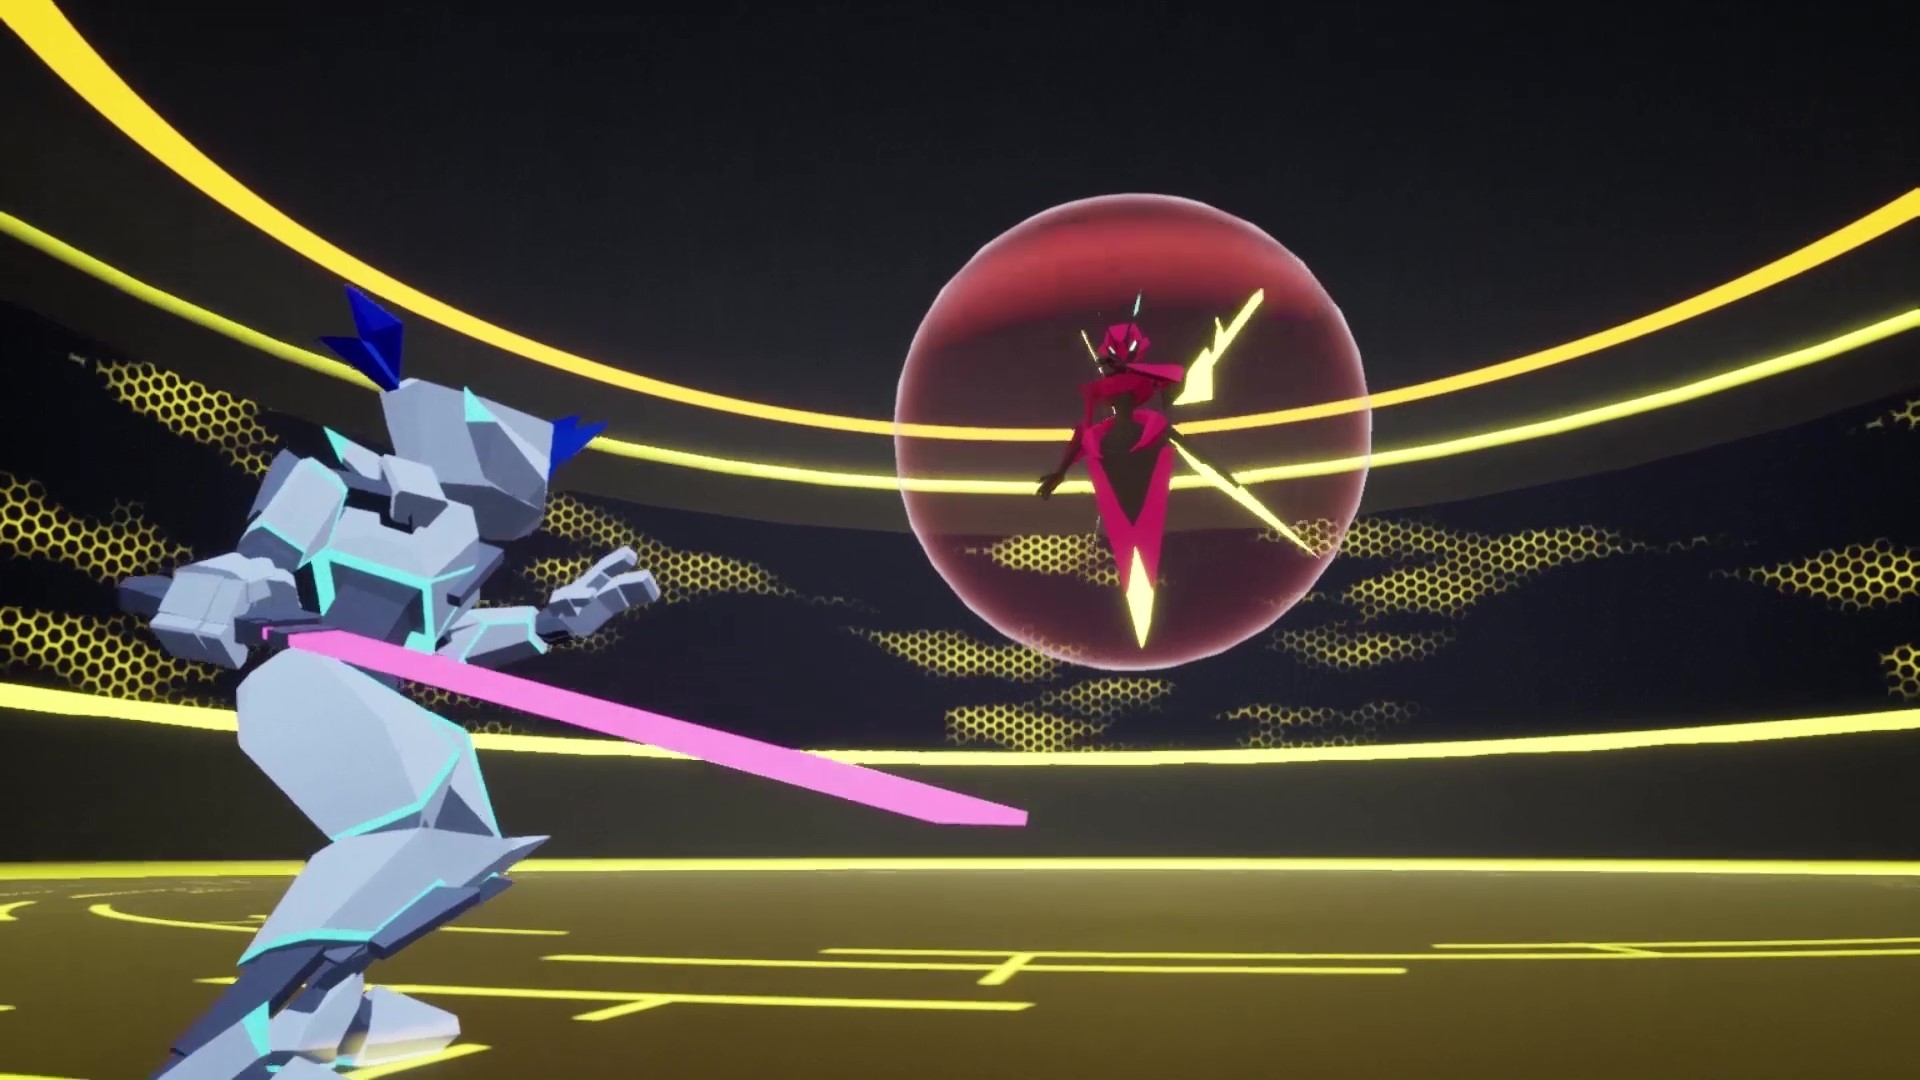 A screenshot of some characters fighting within Katana Rama. They are both low poly and mech-like, with the main character bracing to attack in the foreground.